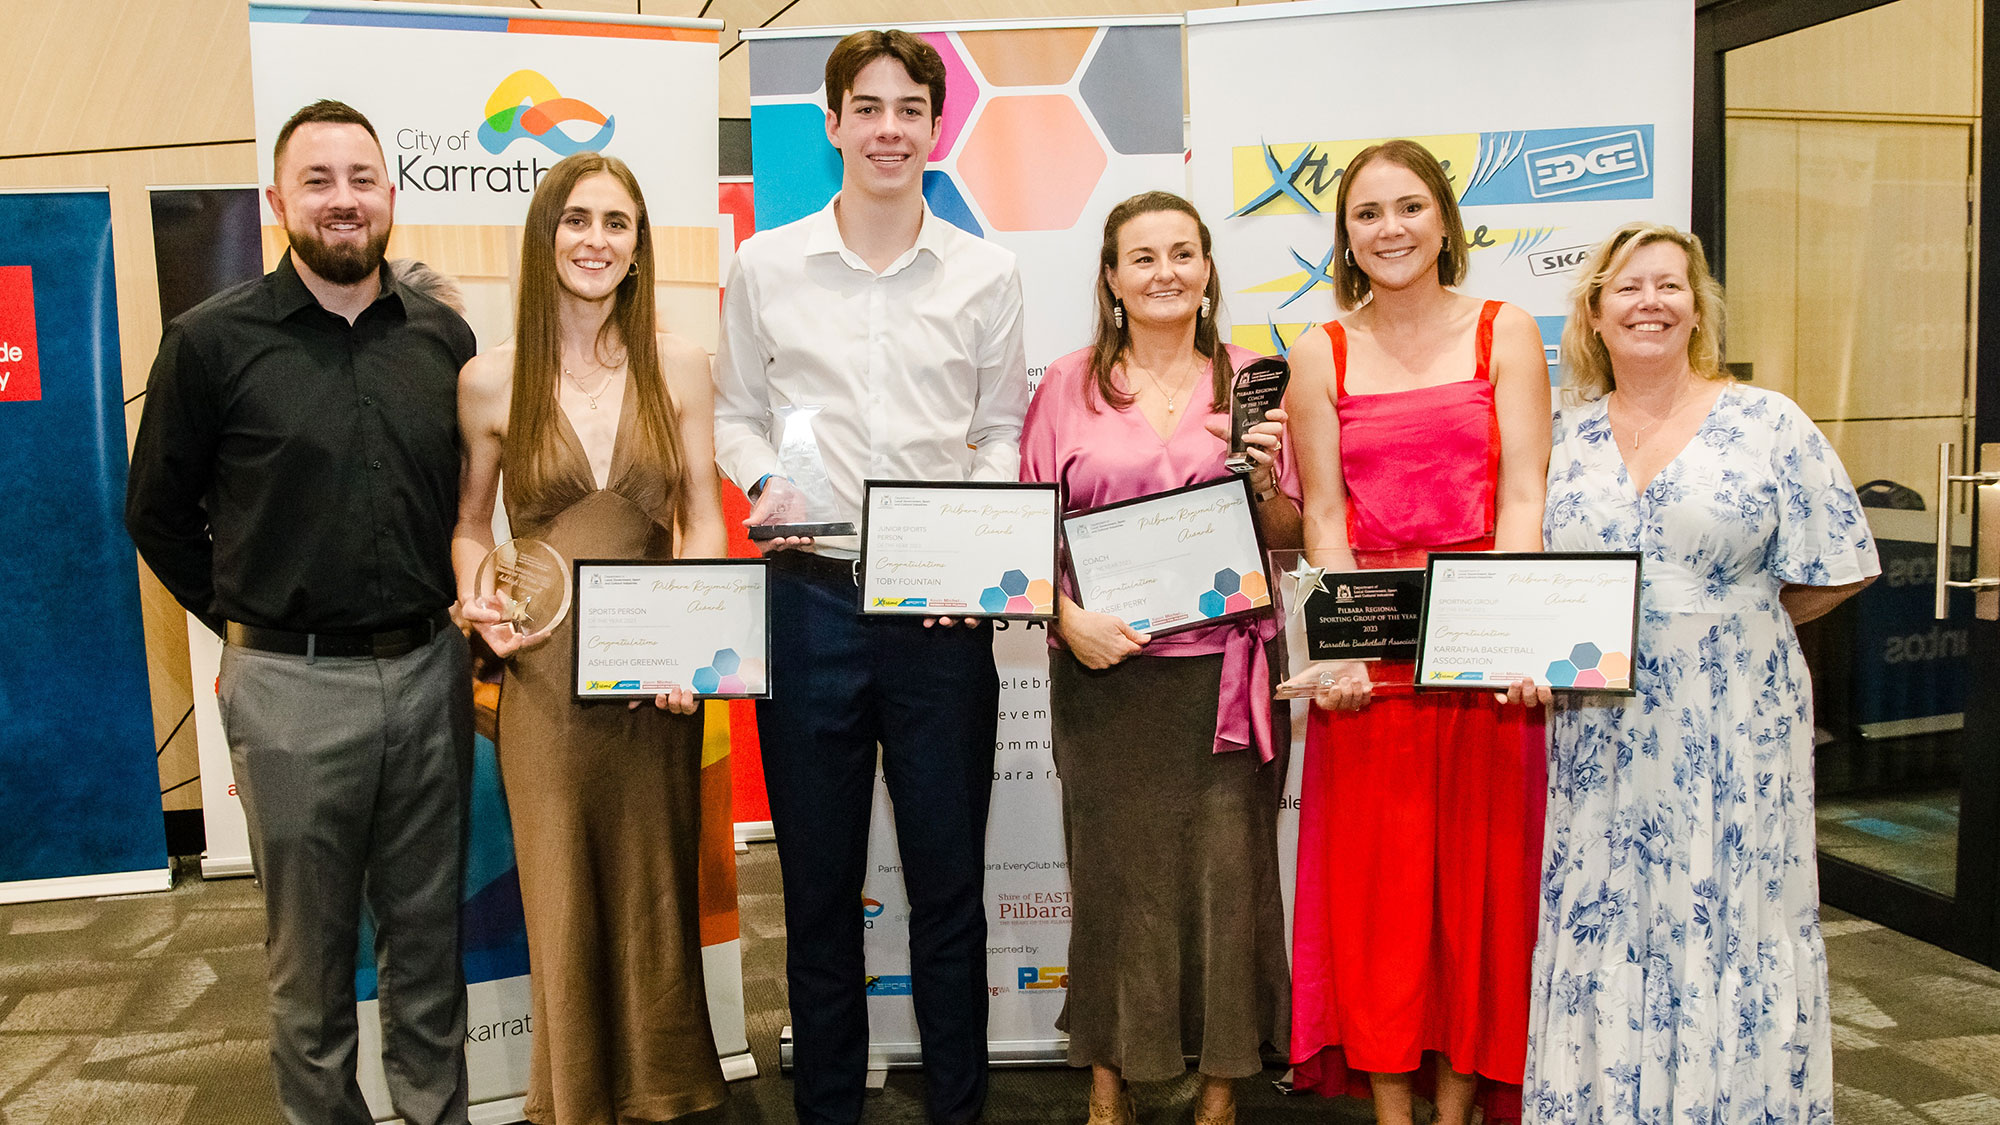 DLGSC Pilbara Regional Manager Toby Cotterel (left) with award winners in Karratha - Ashleigh Greenwell, Toby Fountain, Cassie Perry and Jodie Swaffer - plus Sharon Leyland from sponsor Extreme Edge.